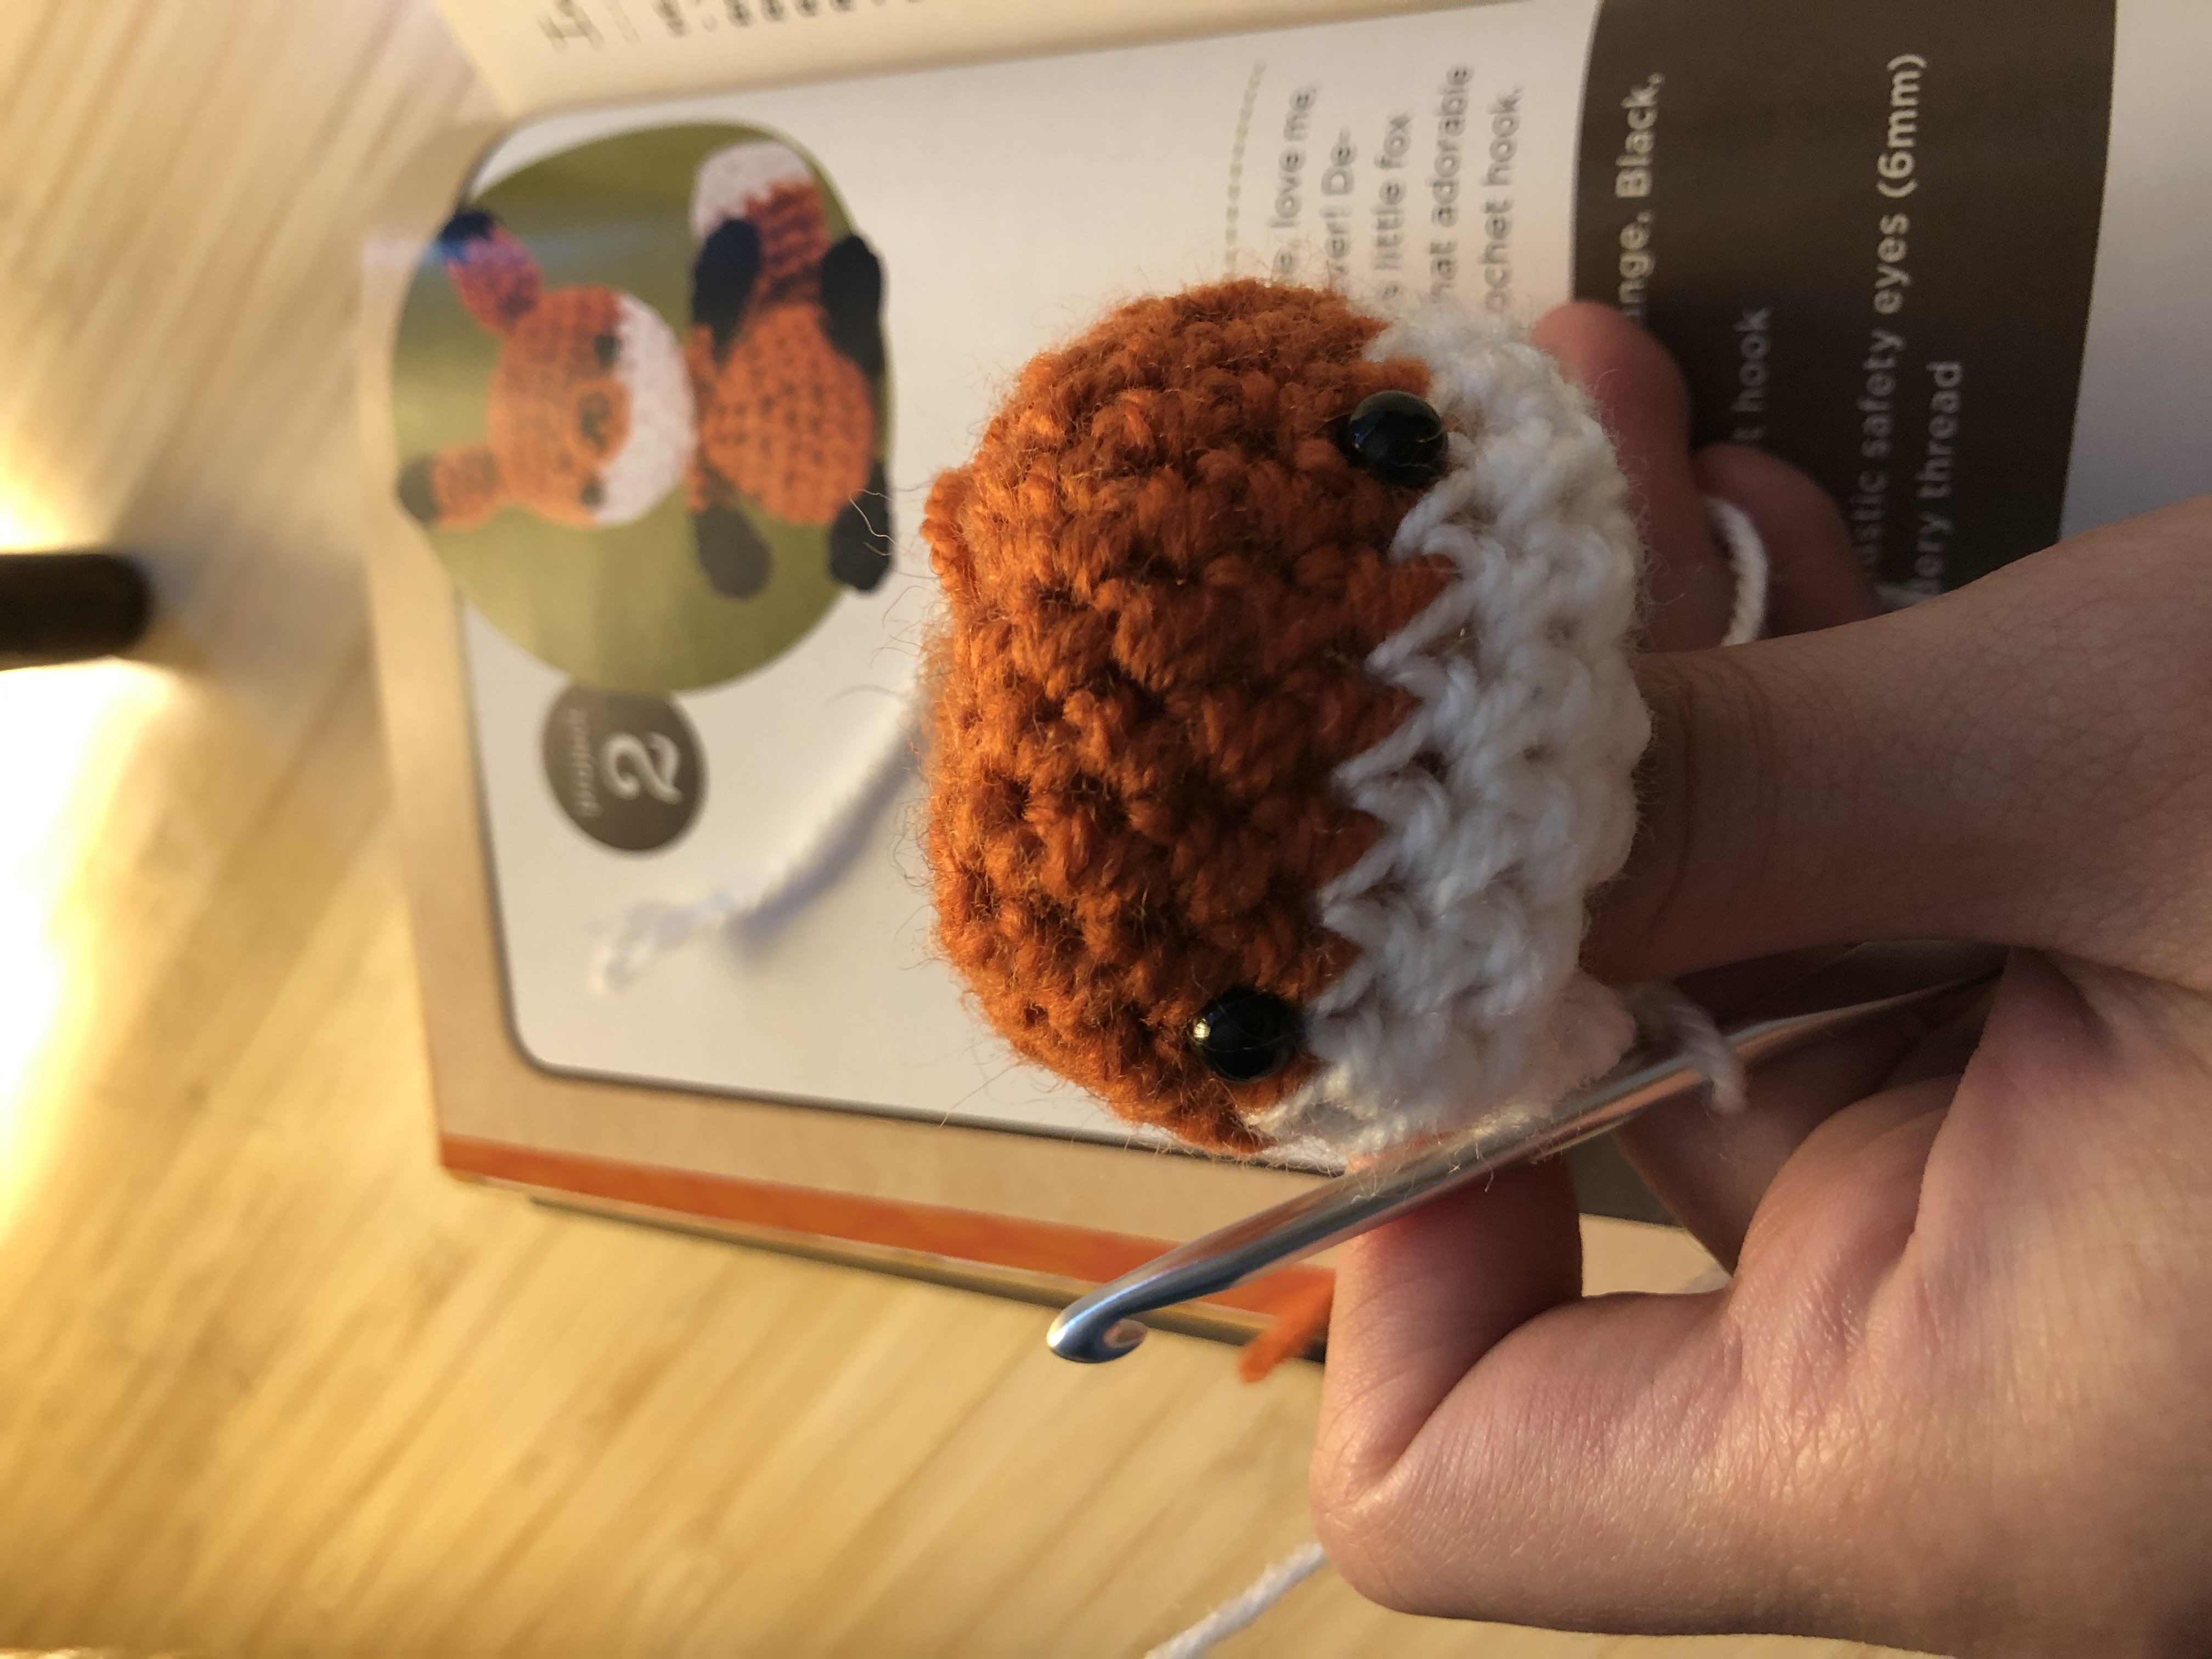 A complete rounded head of the amigurumi fox with eyes attached but no ears